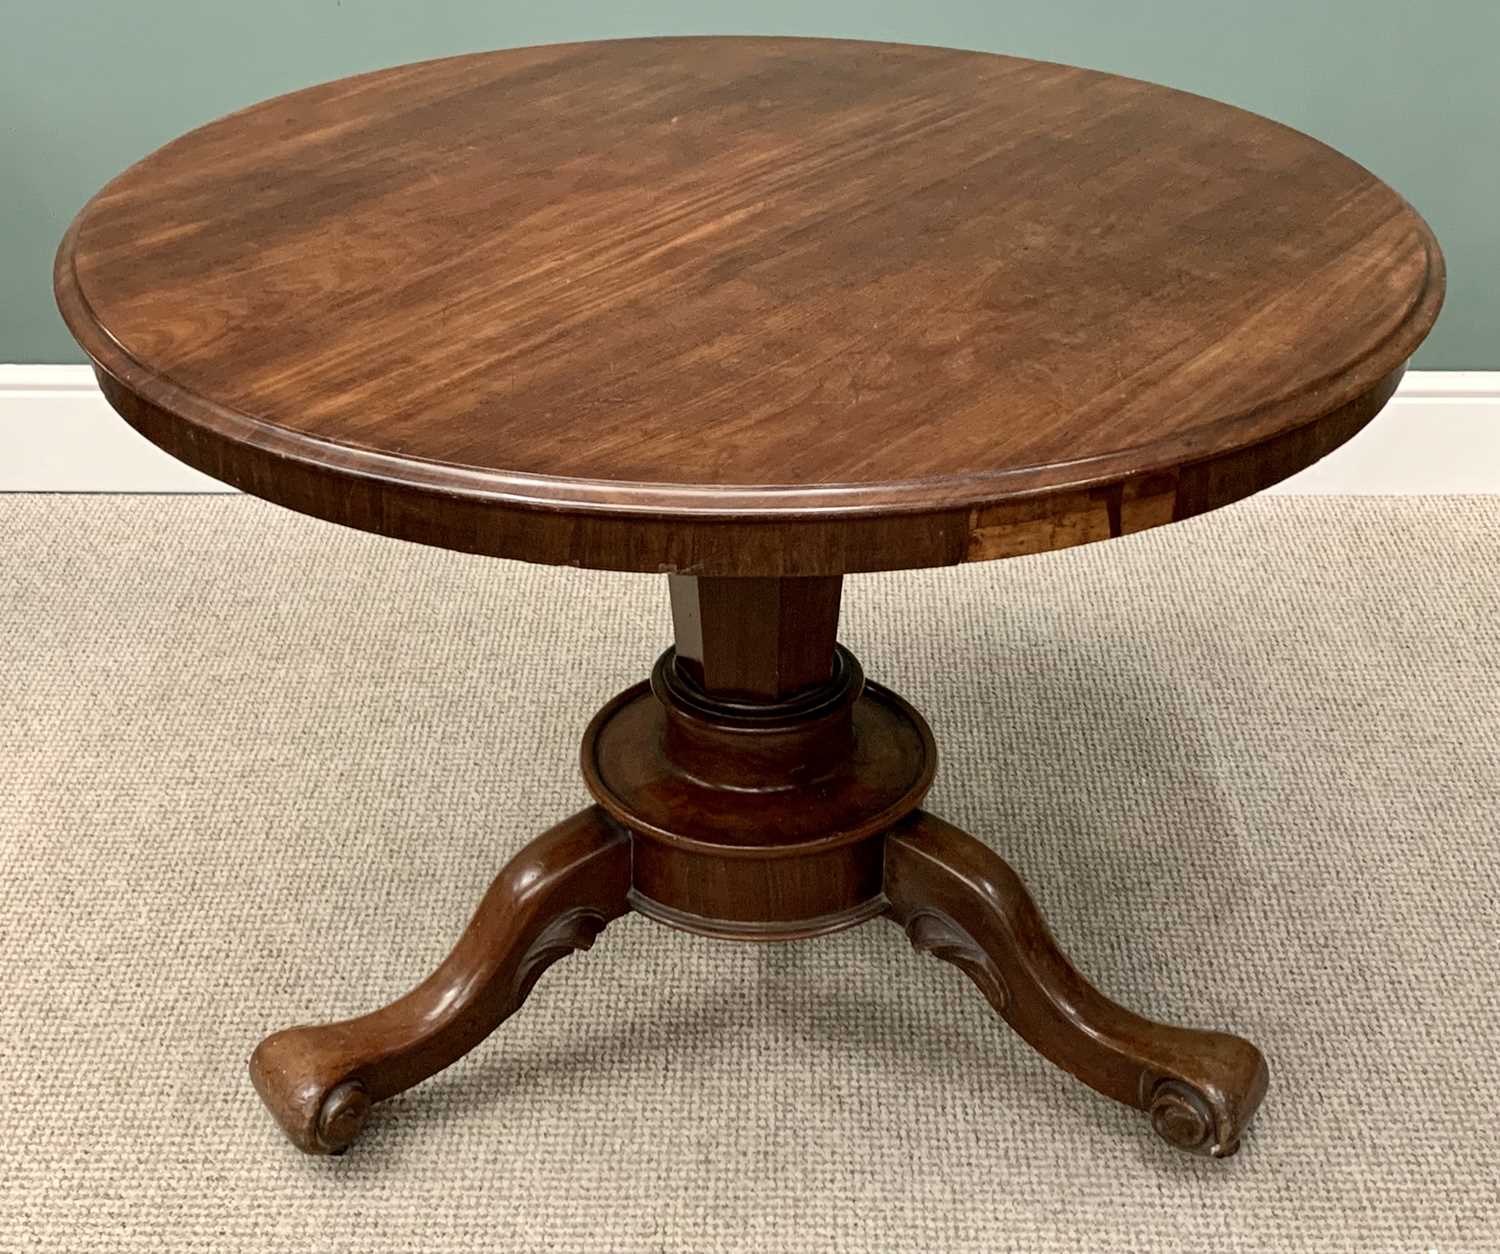 ANTIQUE MAHOGANY DINING SUITE comprising circular tilt top table on a tripod base, 78cms H, 105cms - Image 2 of 6